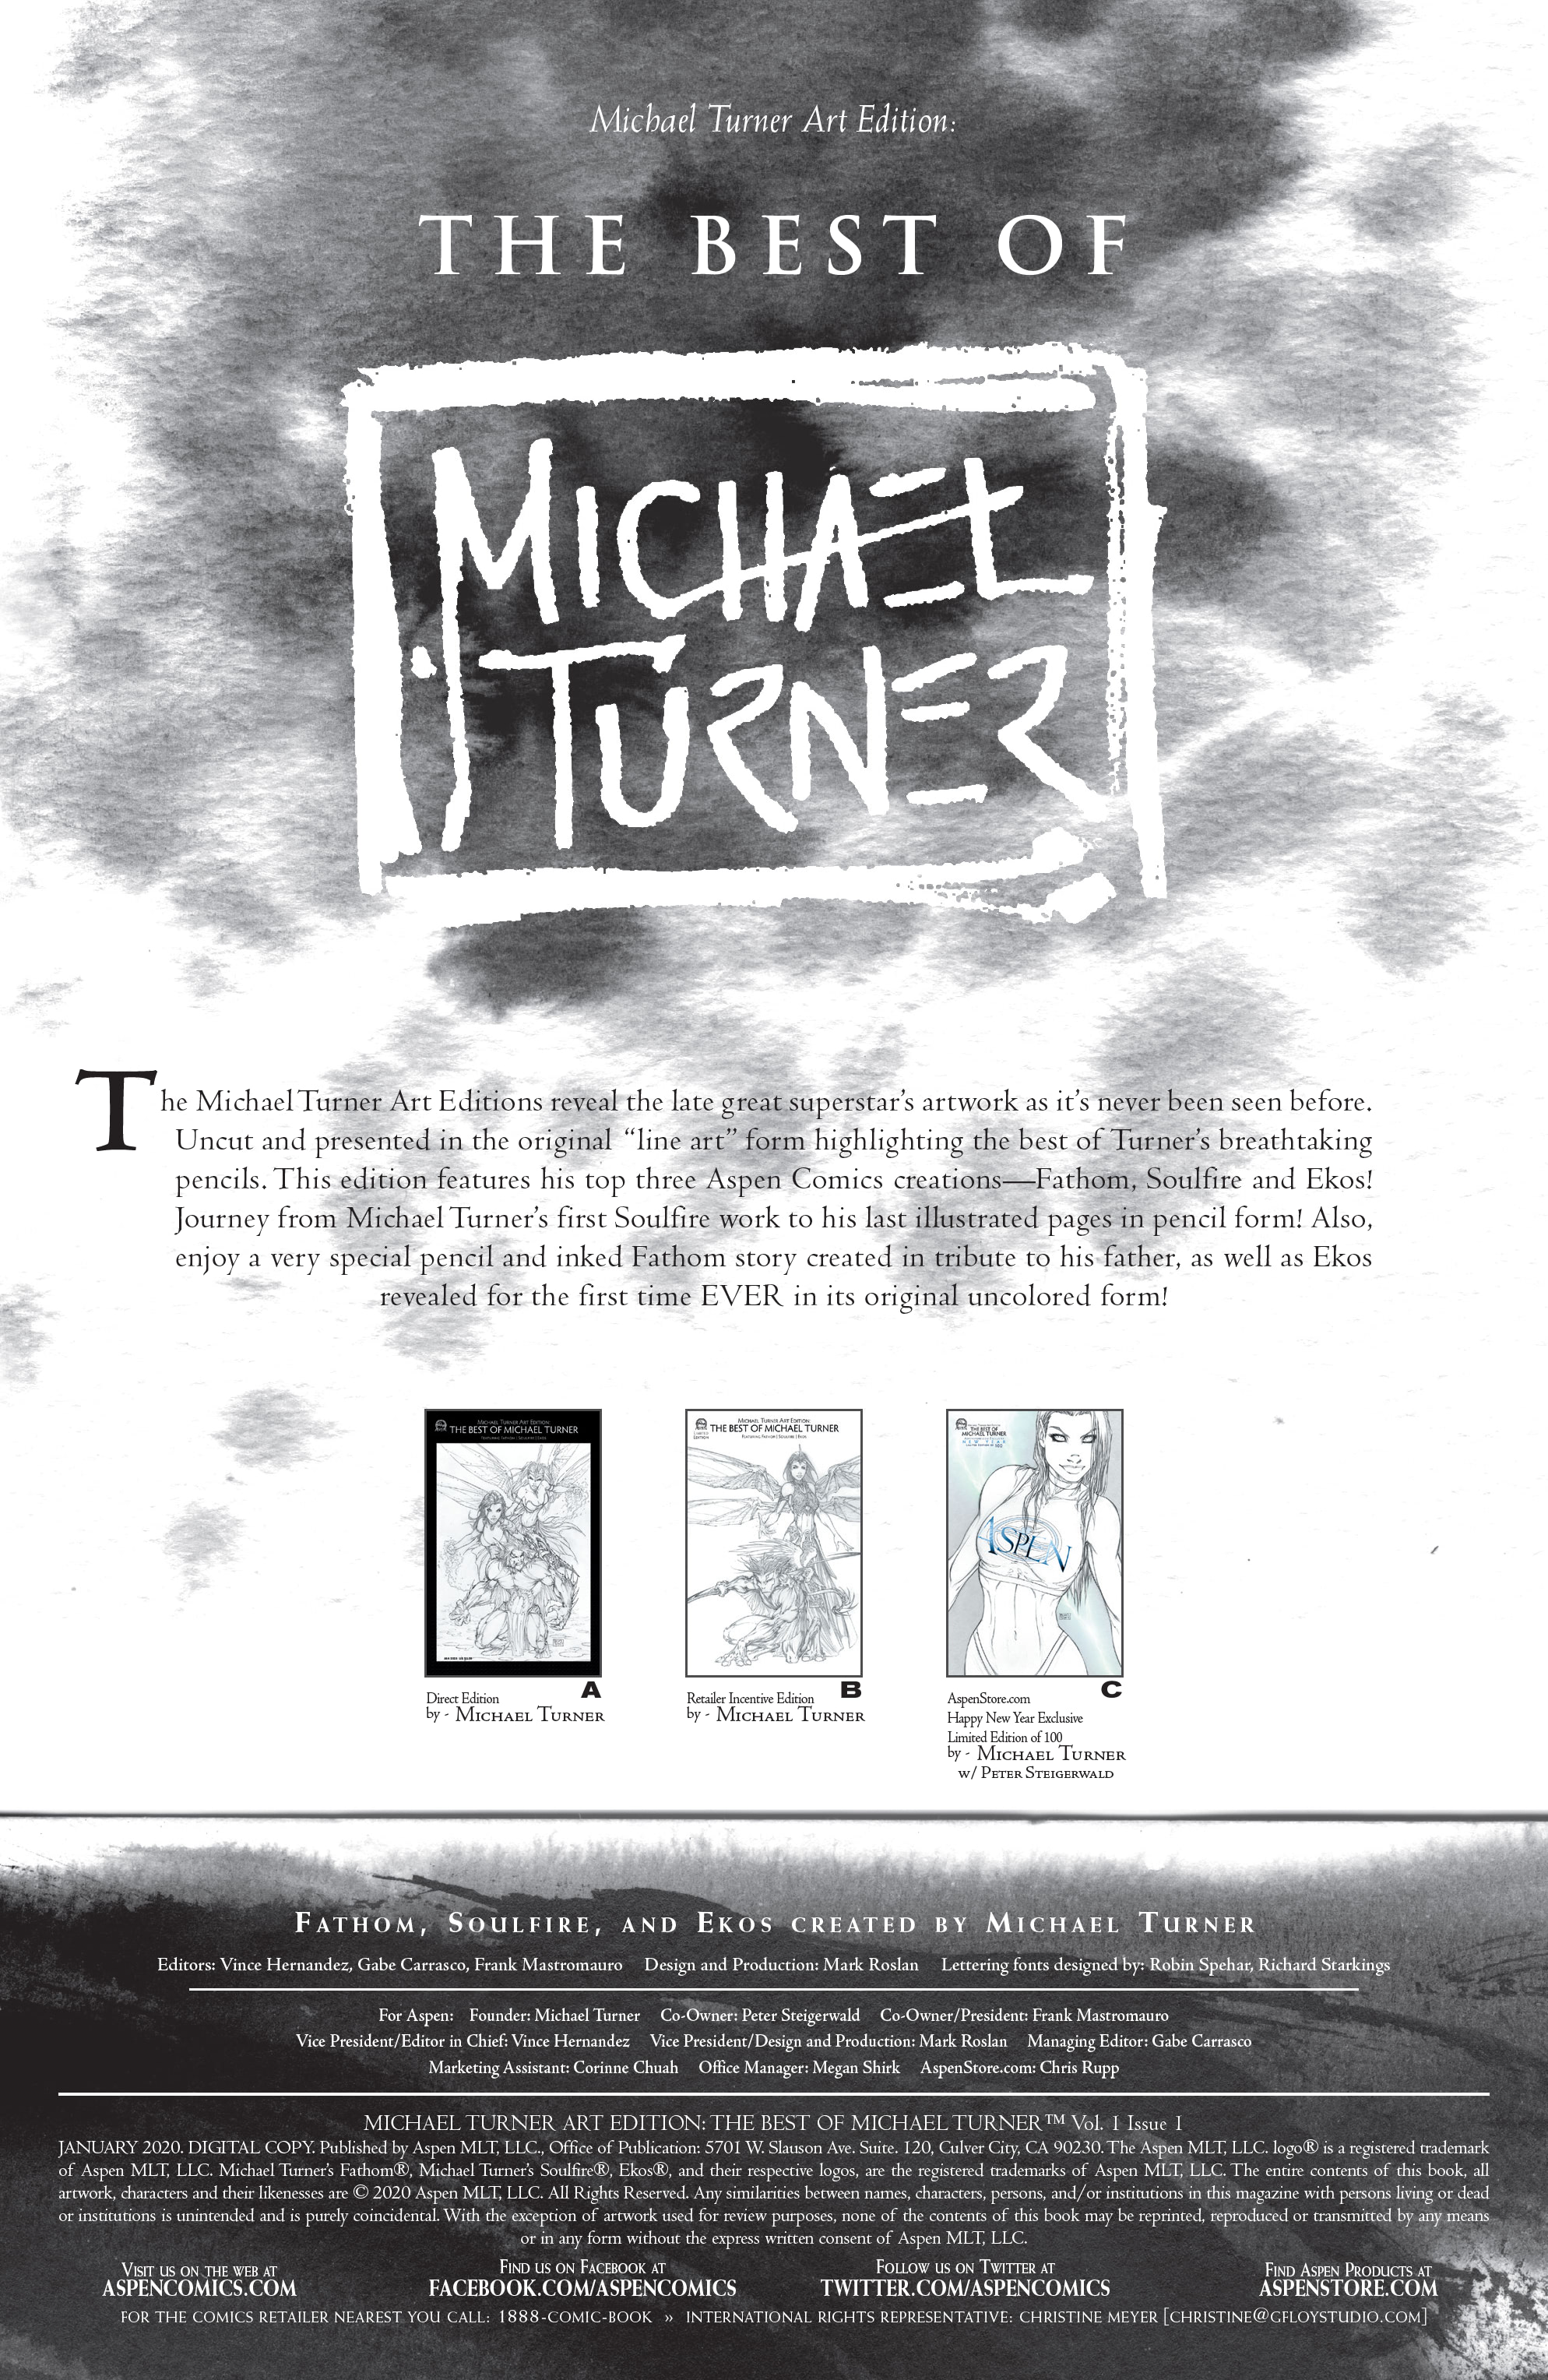 Read online Michael Turner Art Edition: The Best of Michael Turner comic -  Issue # Full - 2